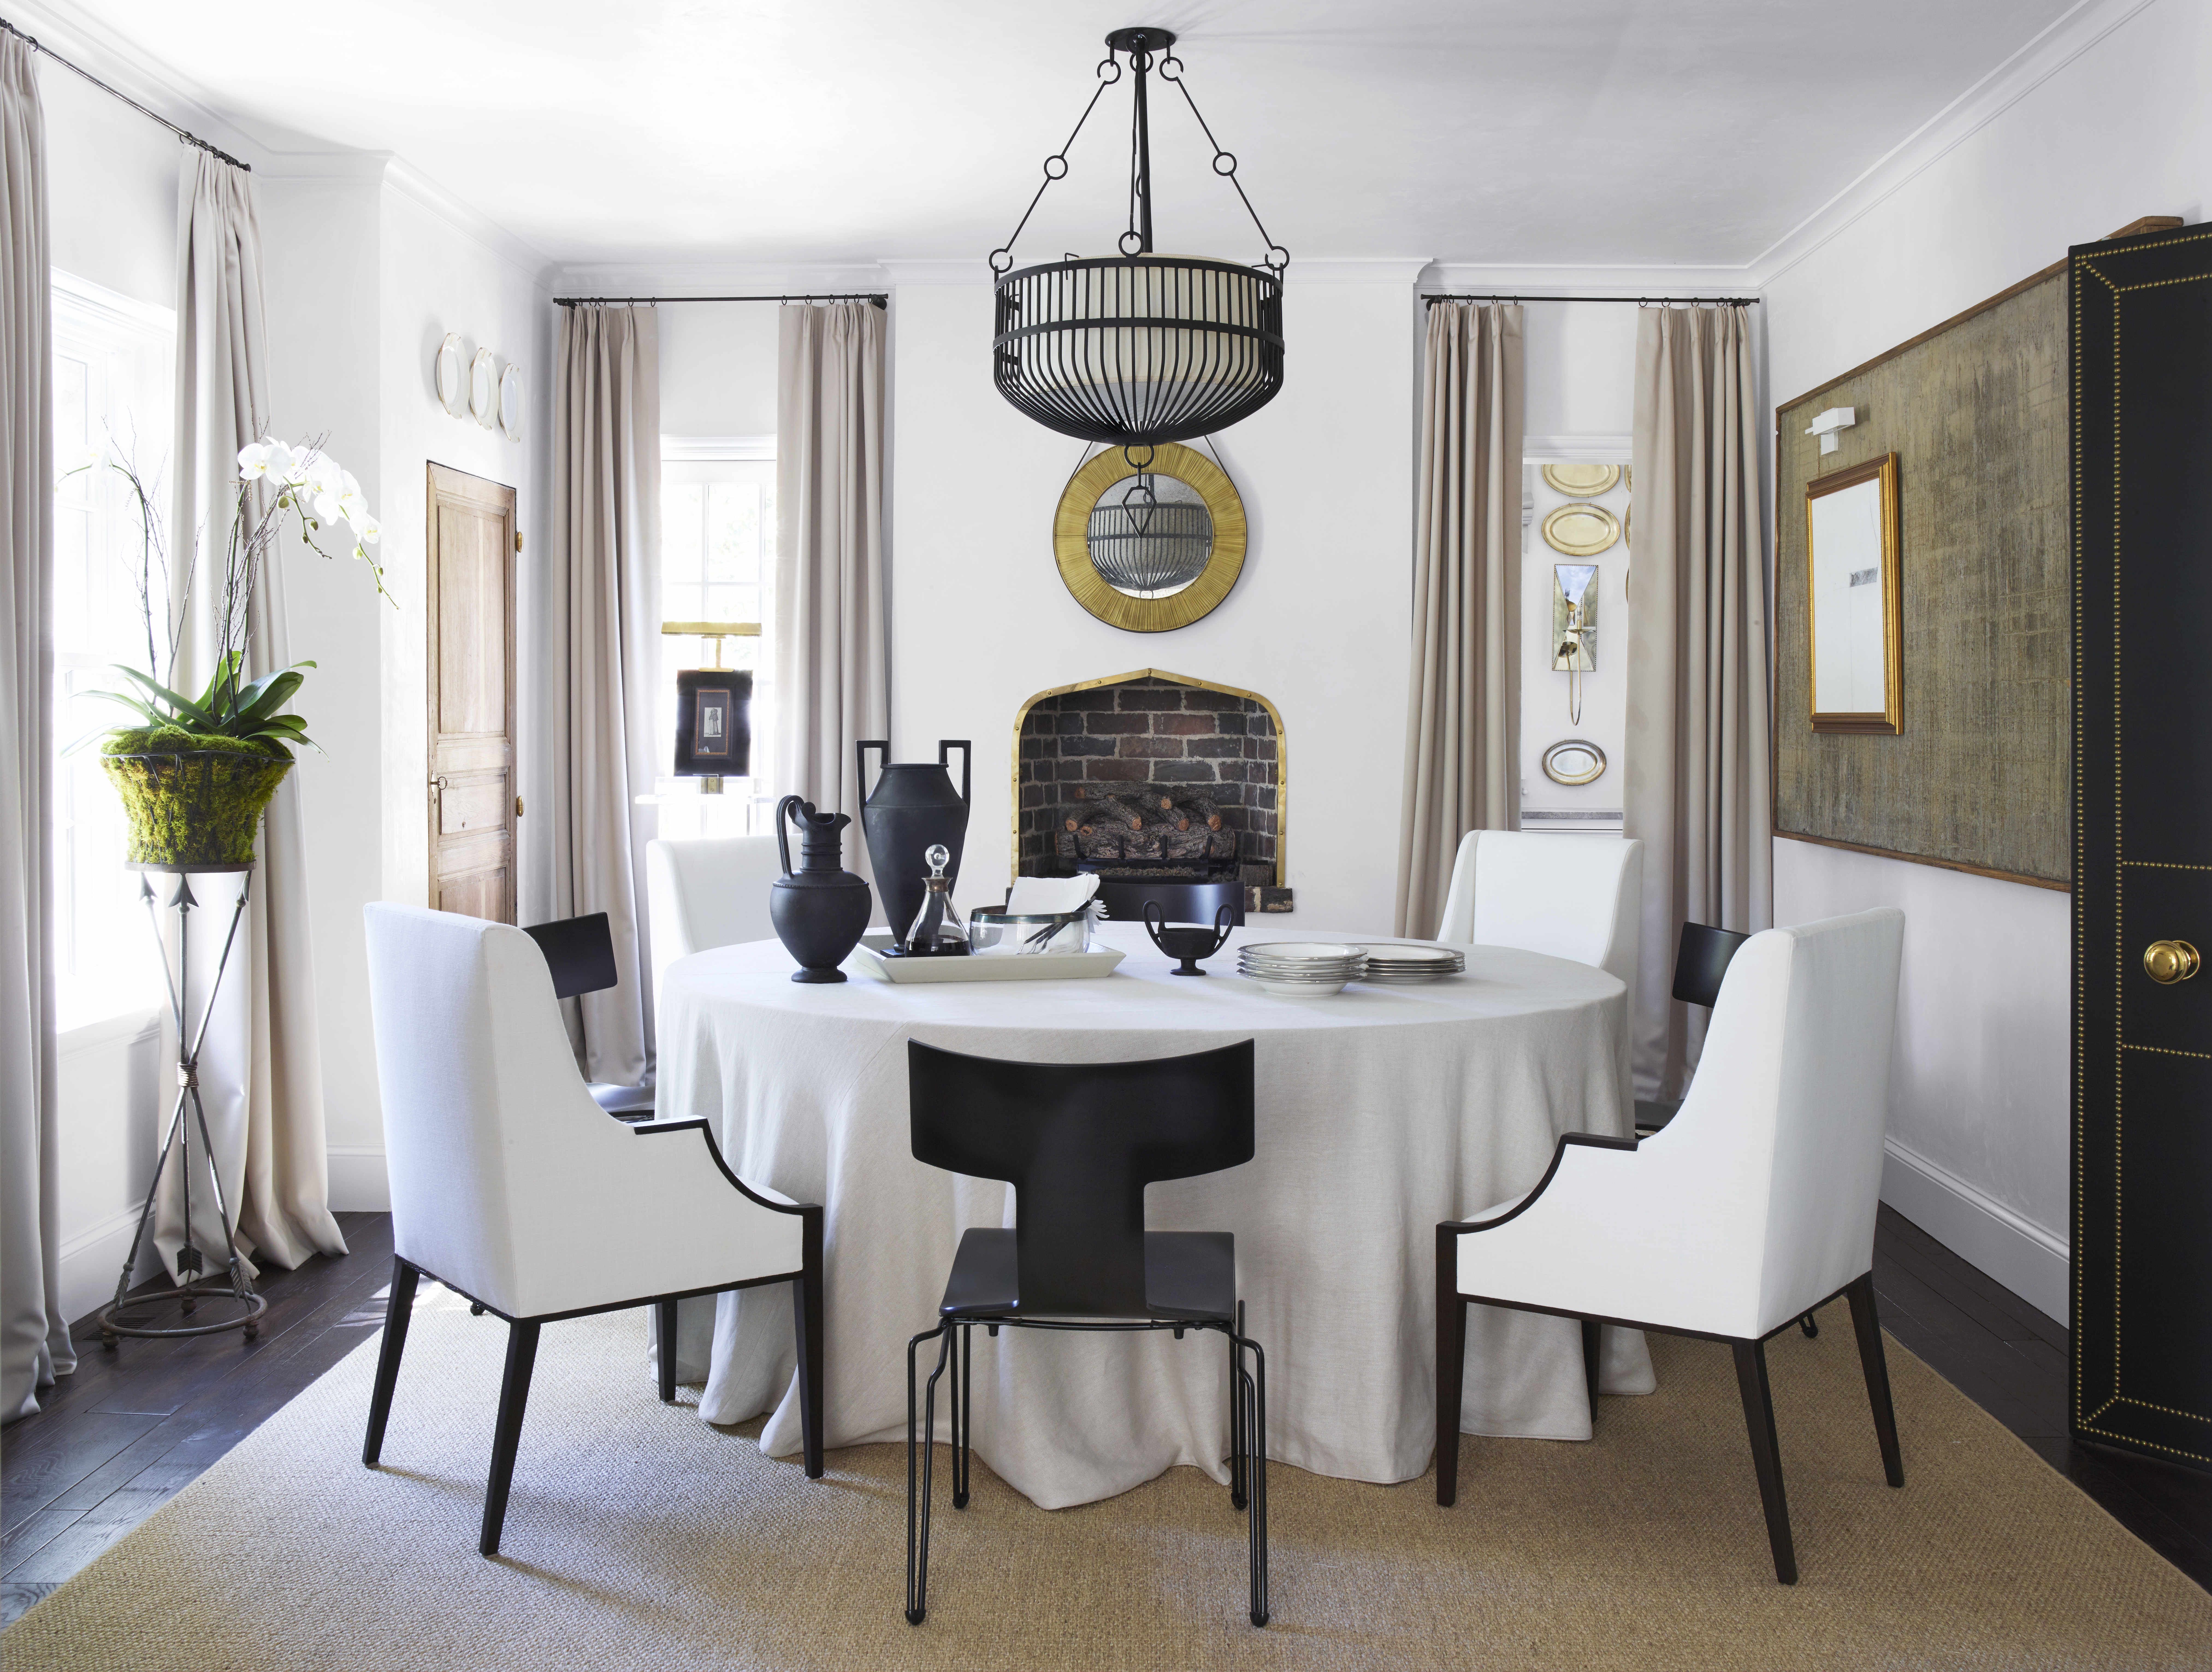 Designer Dining Rooms Decor, Oversized Dining Room Chairs With Arms